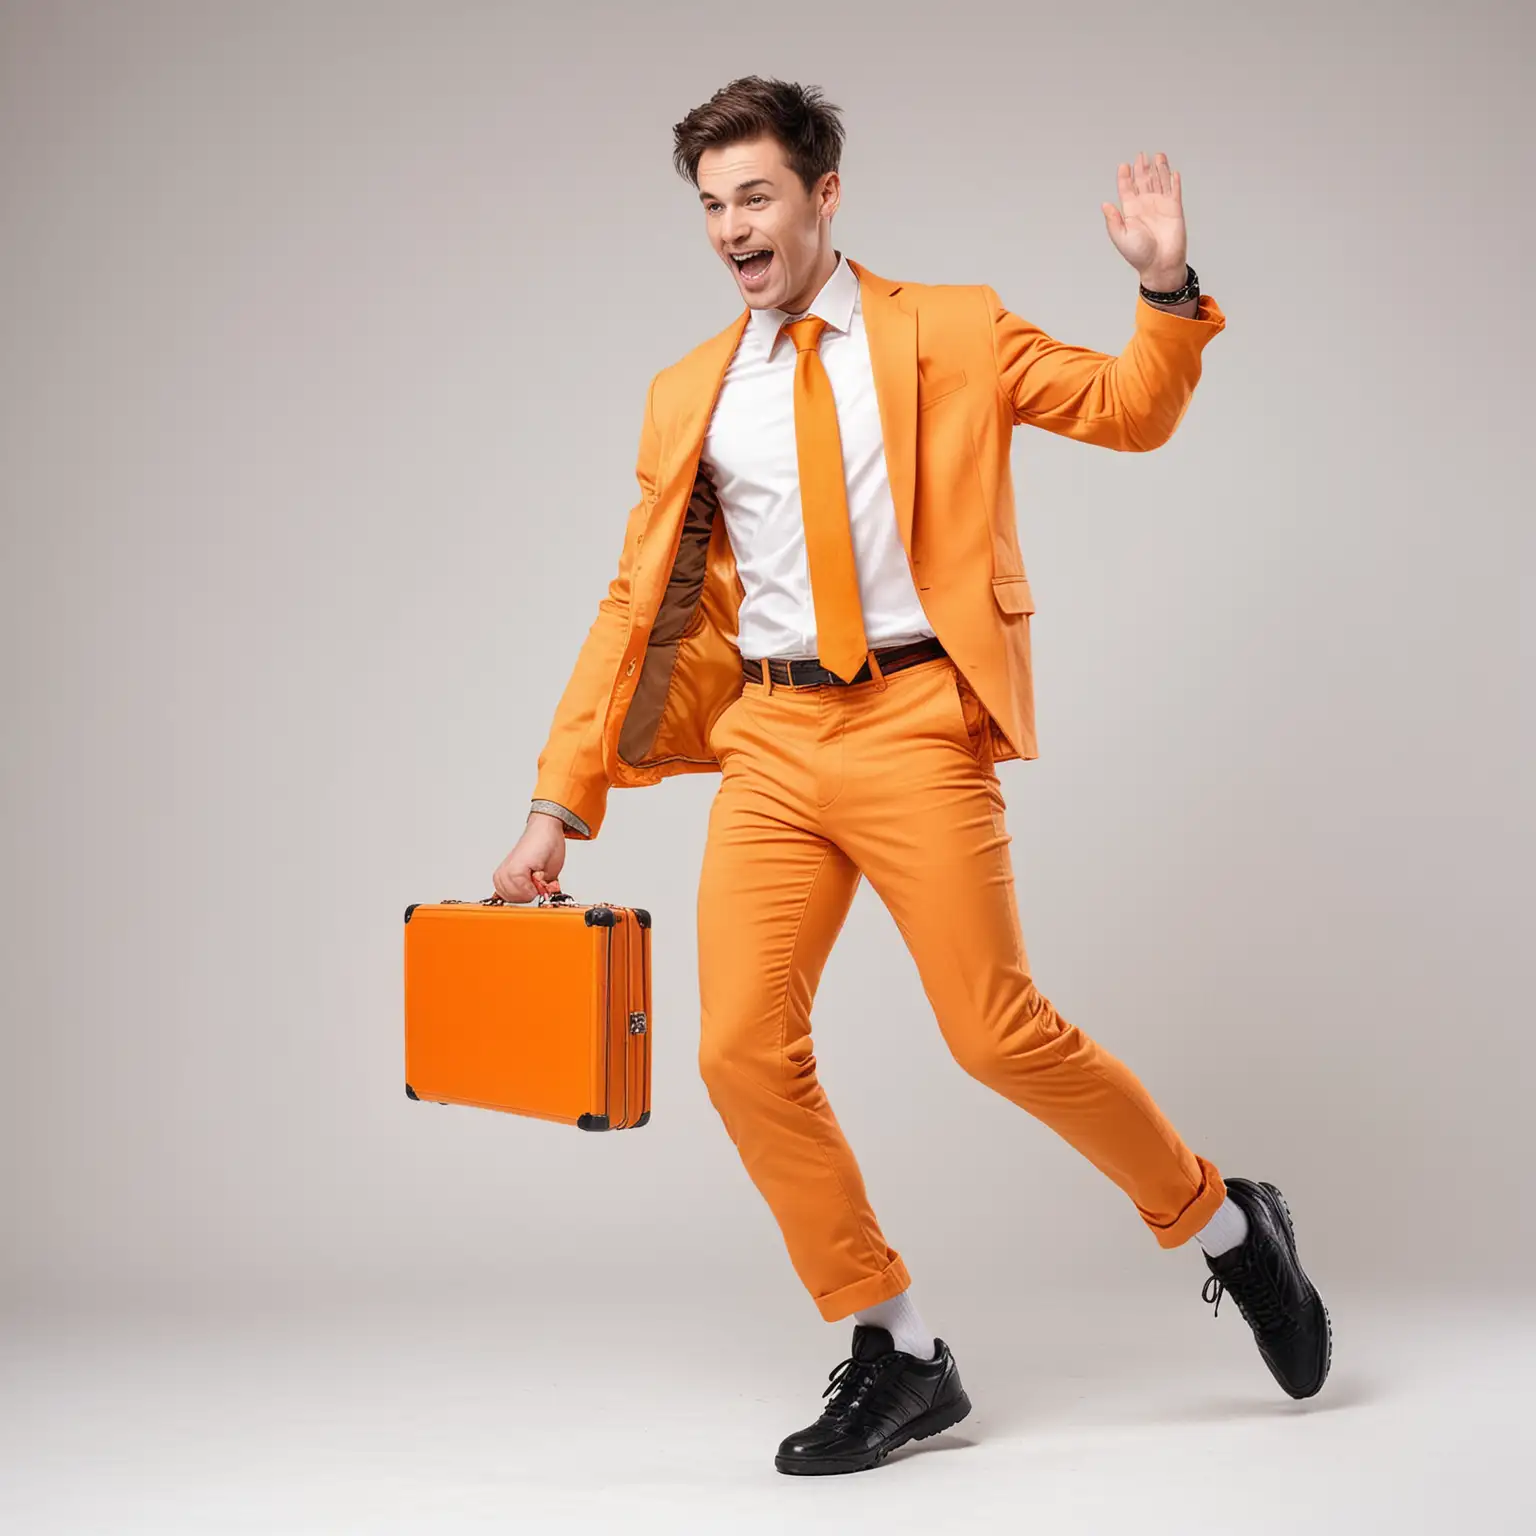 Young Caucasian Man Dancing with Orange Briefcase and Black Sport Shoes